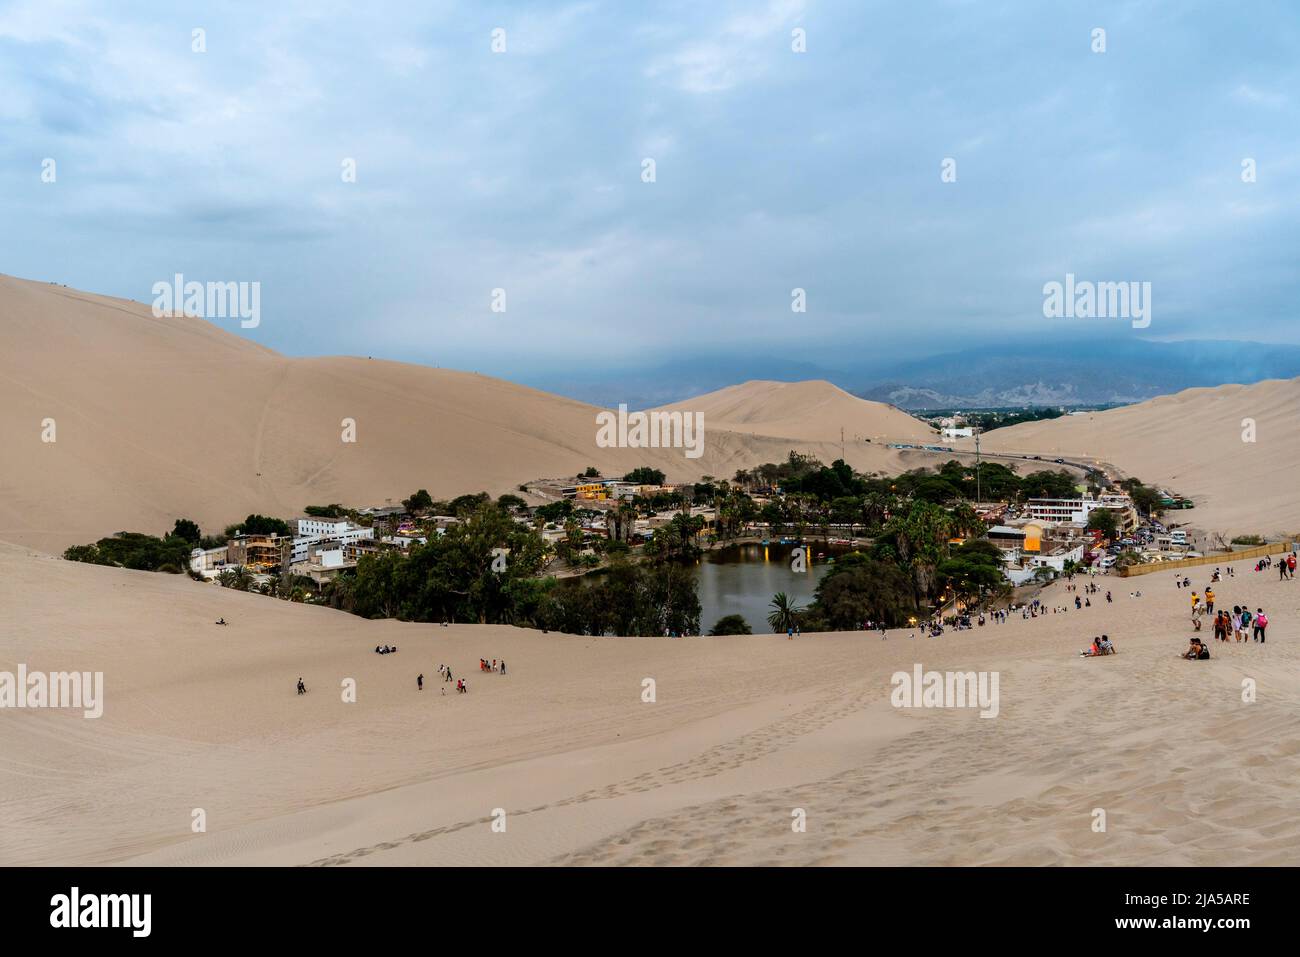 The Oasis Village Of Huacachina, Ica Province, Peru. Stock Photo